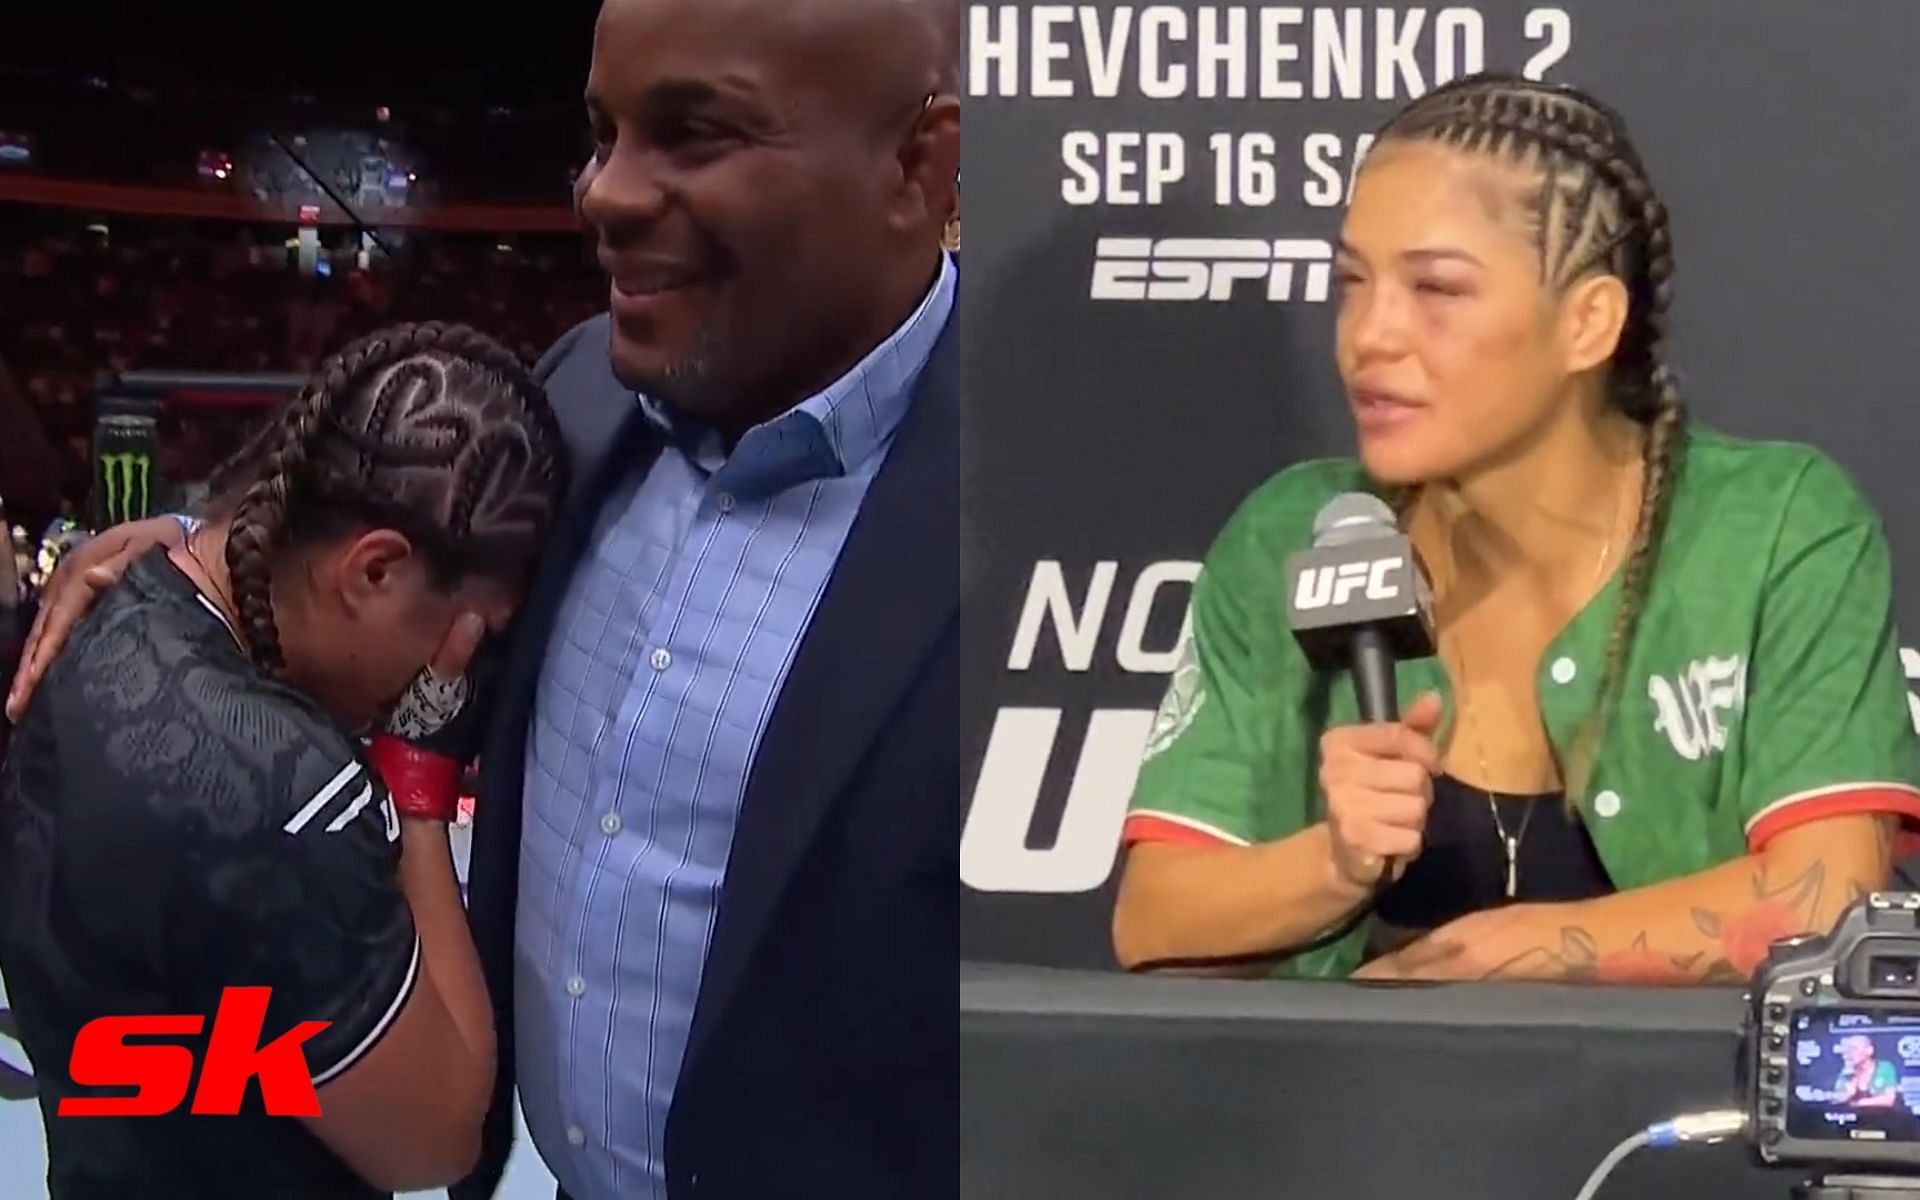 Tracy Cortez during Noche UFC octagon interview and press conference Images via UFC official YouTube channel)